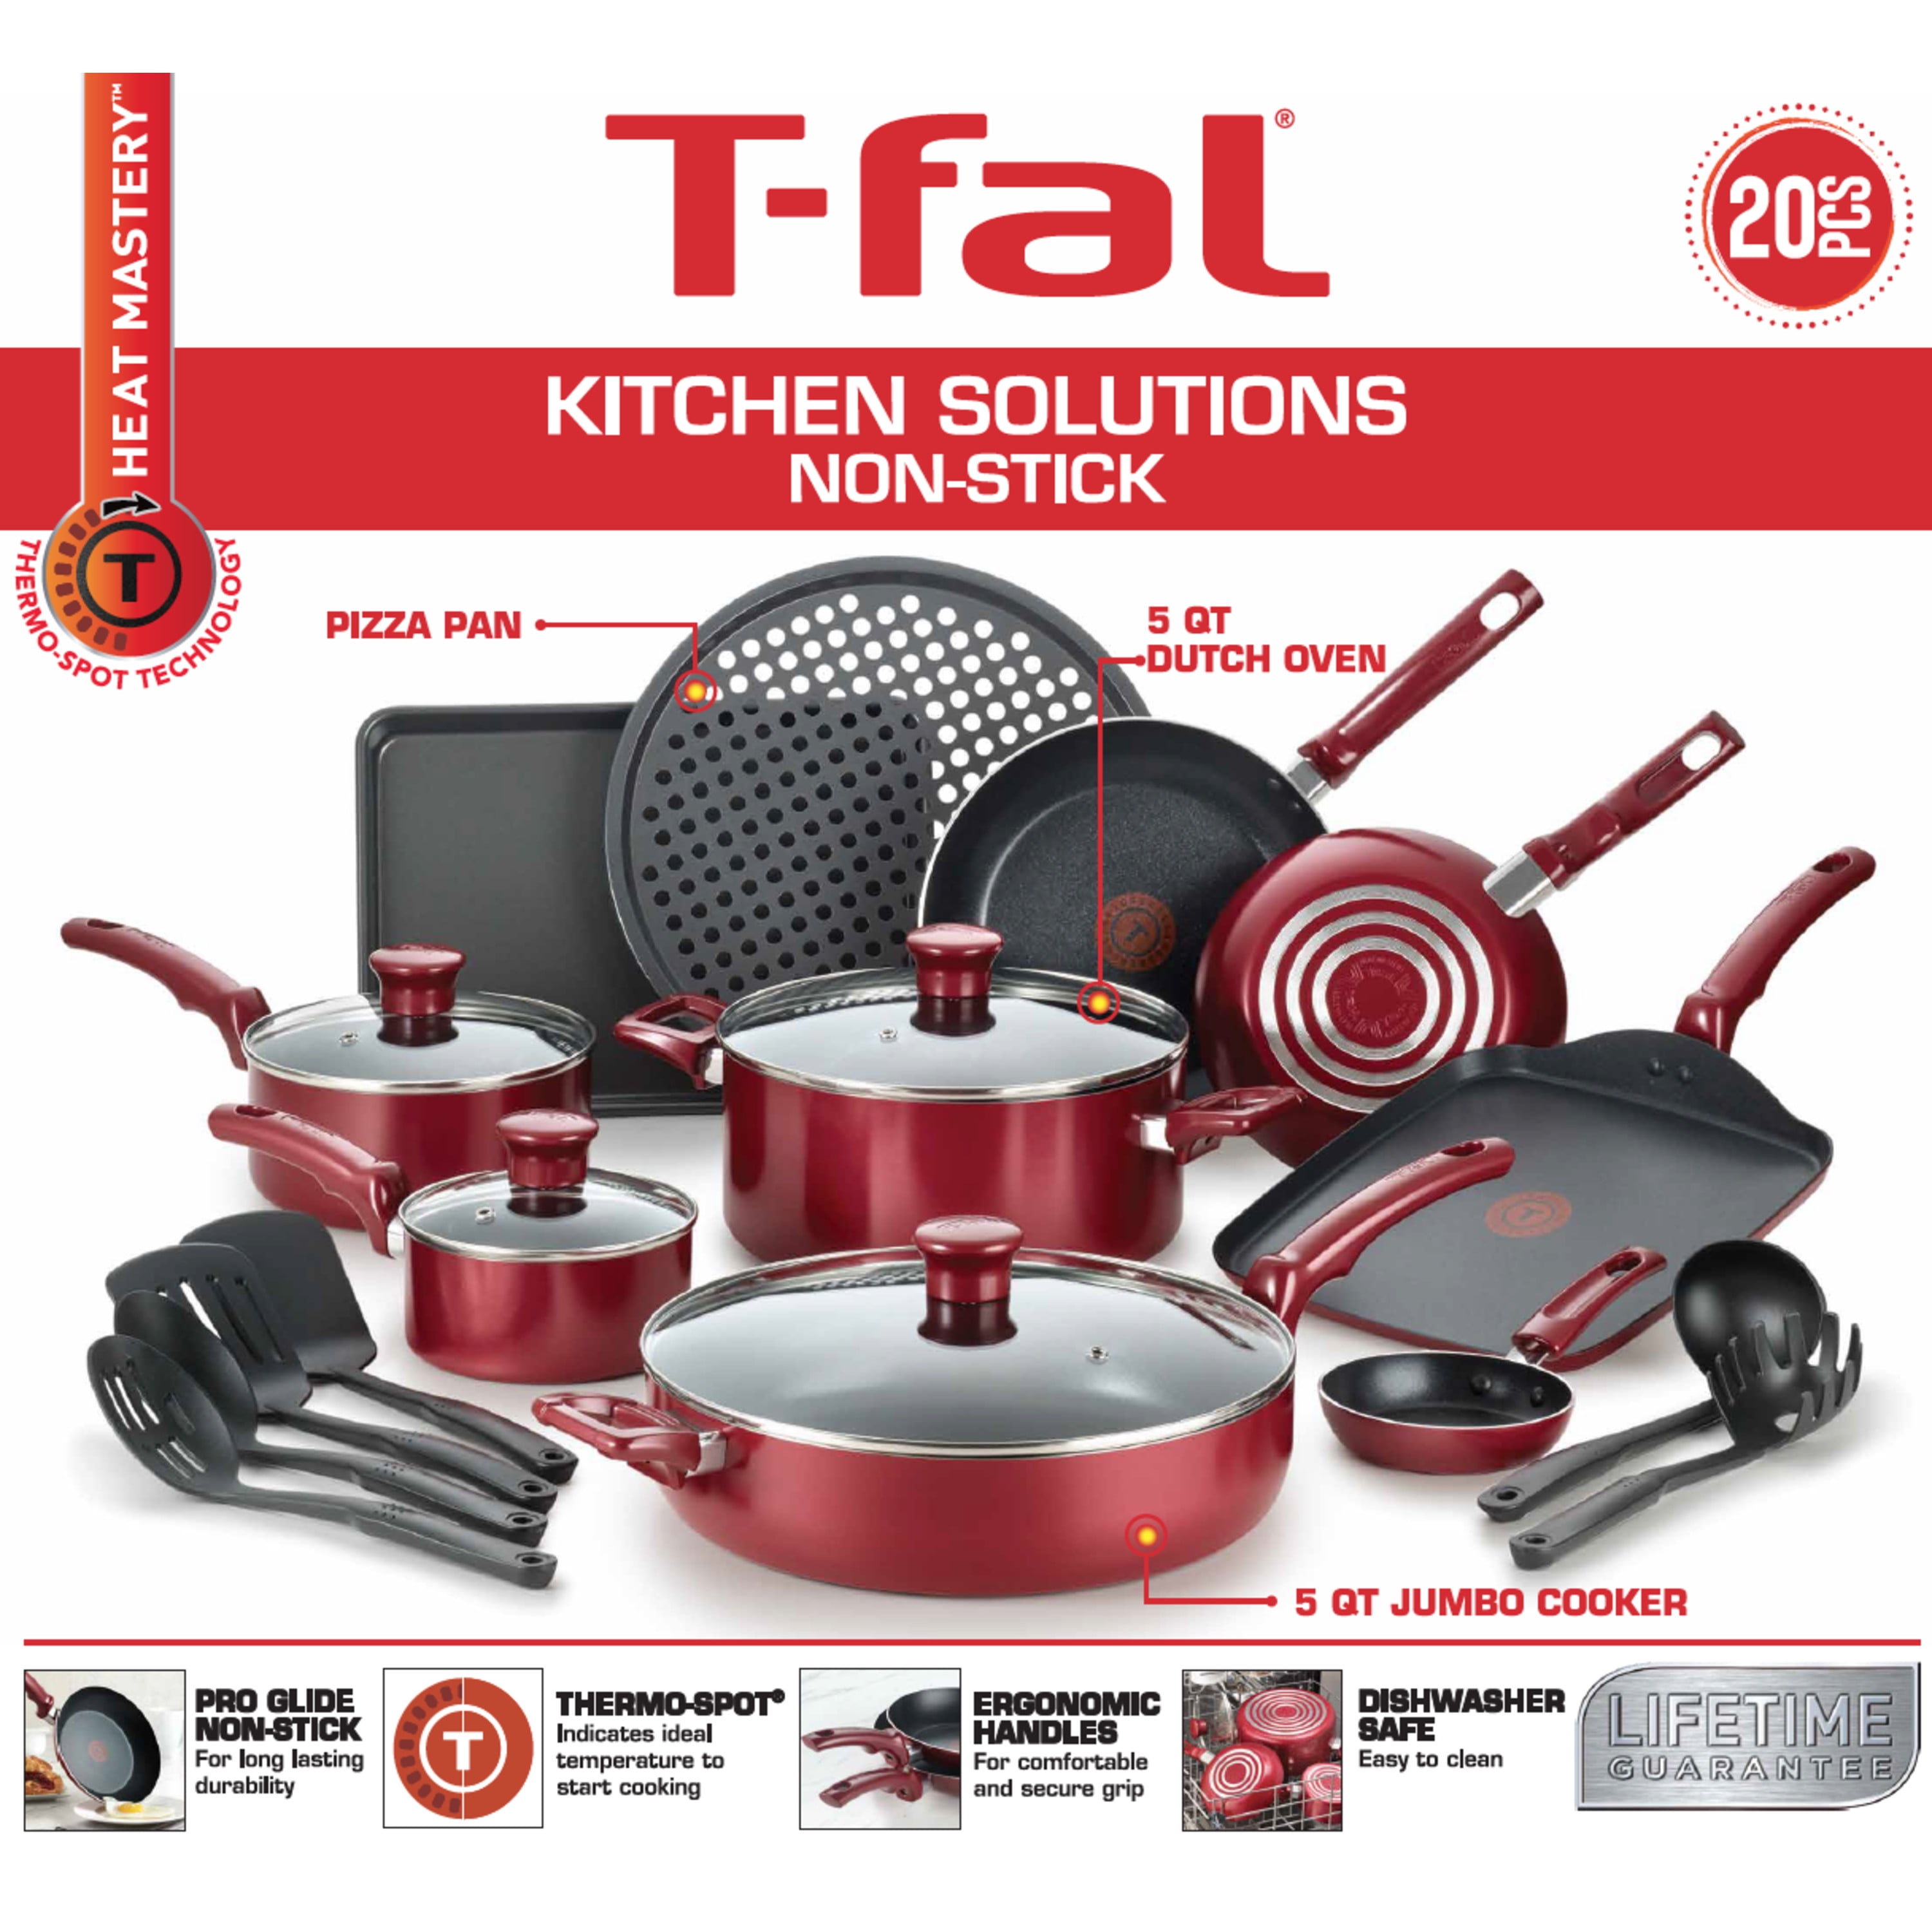 T-fal Kitchen Solutions 22-Piece Nonstick Cookware Set, Thermospot, Red 